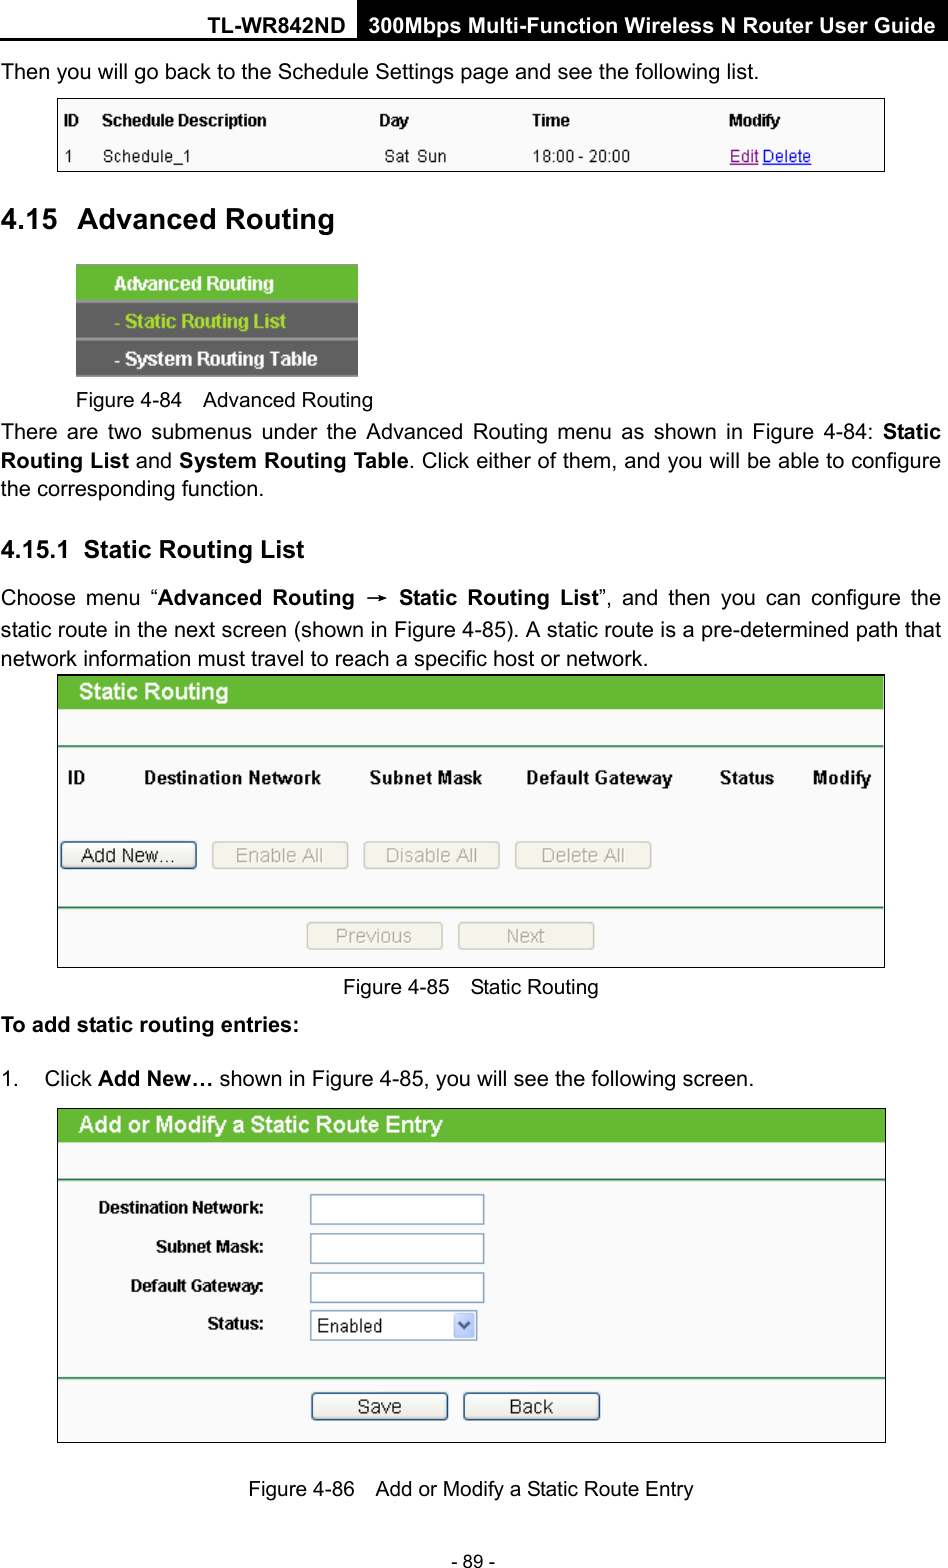 TL-WR842ND 300Mbps Multi-Function Wireless N Router User Guide  - 89 - Then you will go back to the Schedule Settings page and see the following list.  4.15 Advanced Routing  Figure 4-84  Advanced Routing There are two submenus under the Advanced Routing menu as shown in Figure  4-84:  Static Routing List and System Routing Table. Click either of them, and you will be able to configure the corresponding function. 4.15.1 Static Routing List Choose menu “Advanced Routing → Static Routing List”,  and then you can configure the static route in the next screen (shown in Figure 4-85). A static route is a pre-determined path that network information must travel to reach a specific host or network.  Figure 4-85  Static Routing To add static routing entries: 1. Click Add New… shown in Figure 4-85, you will see the following screen.  Figure 4-86  Add or Modify a Static Route Entry 